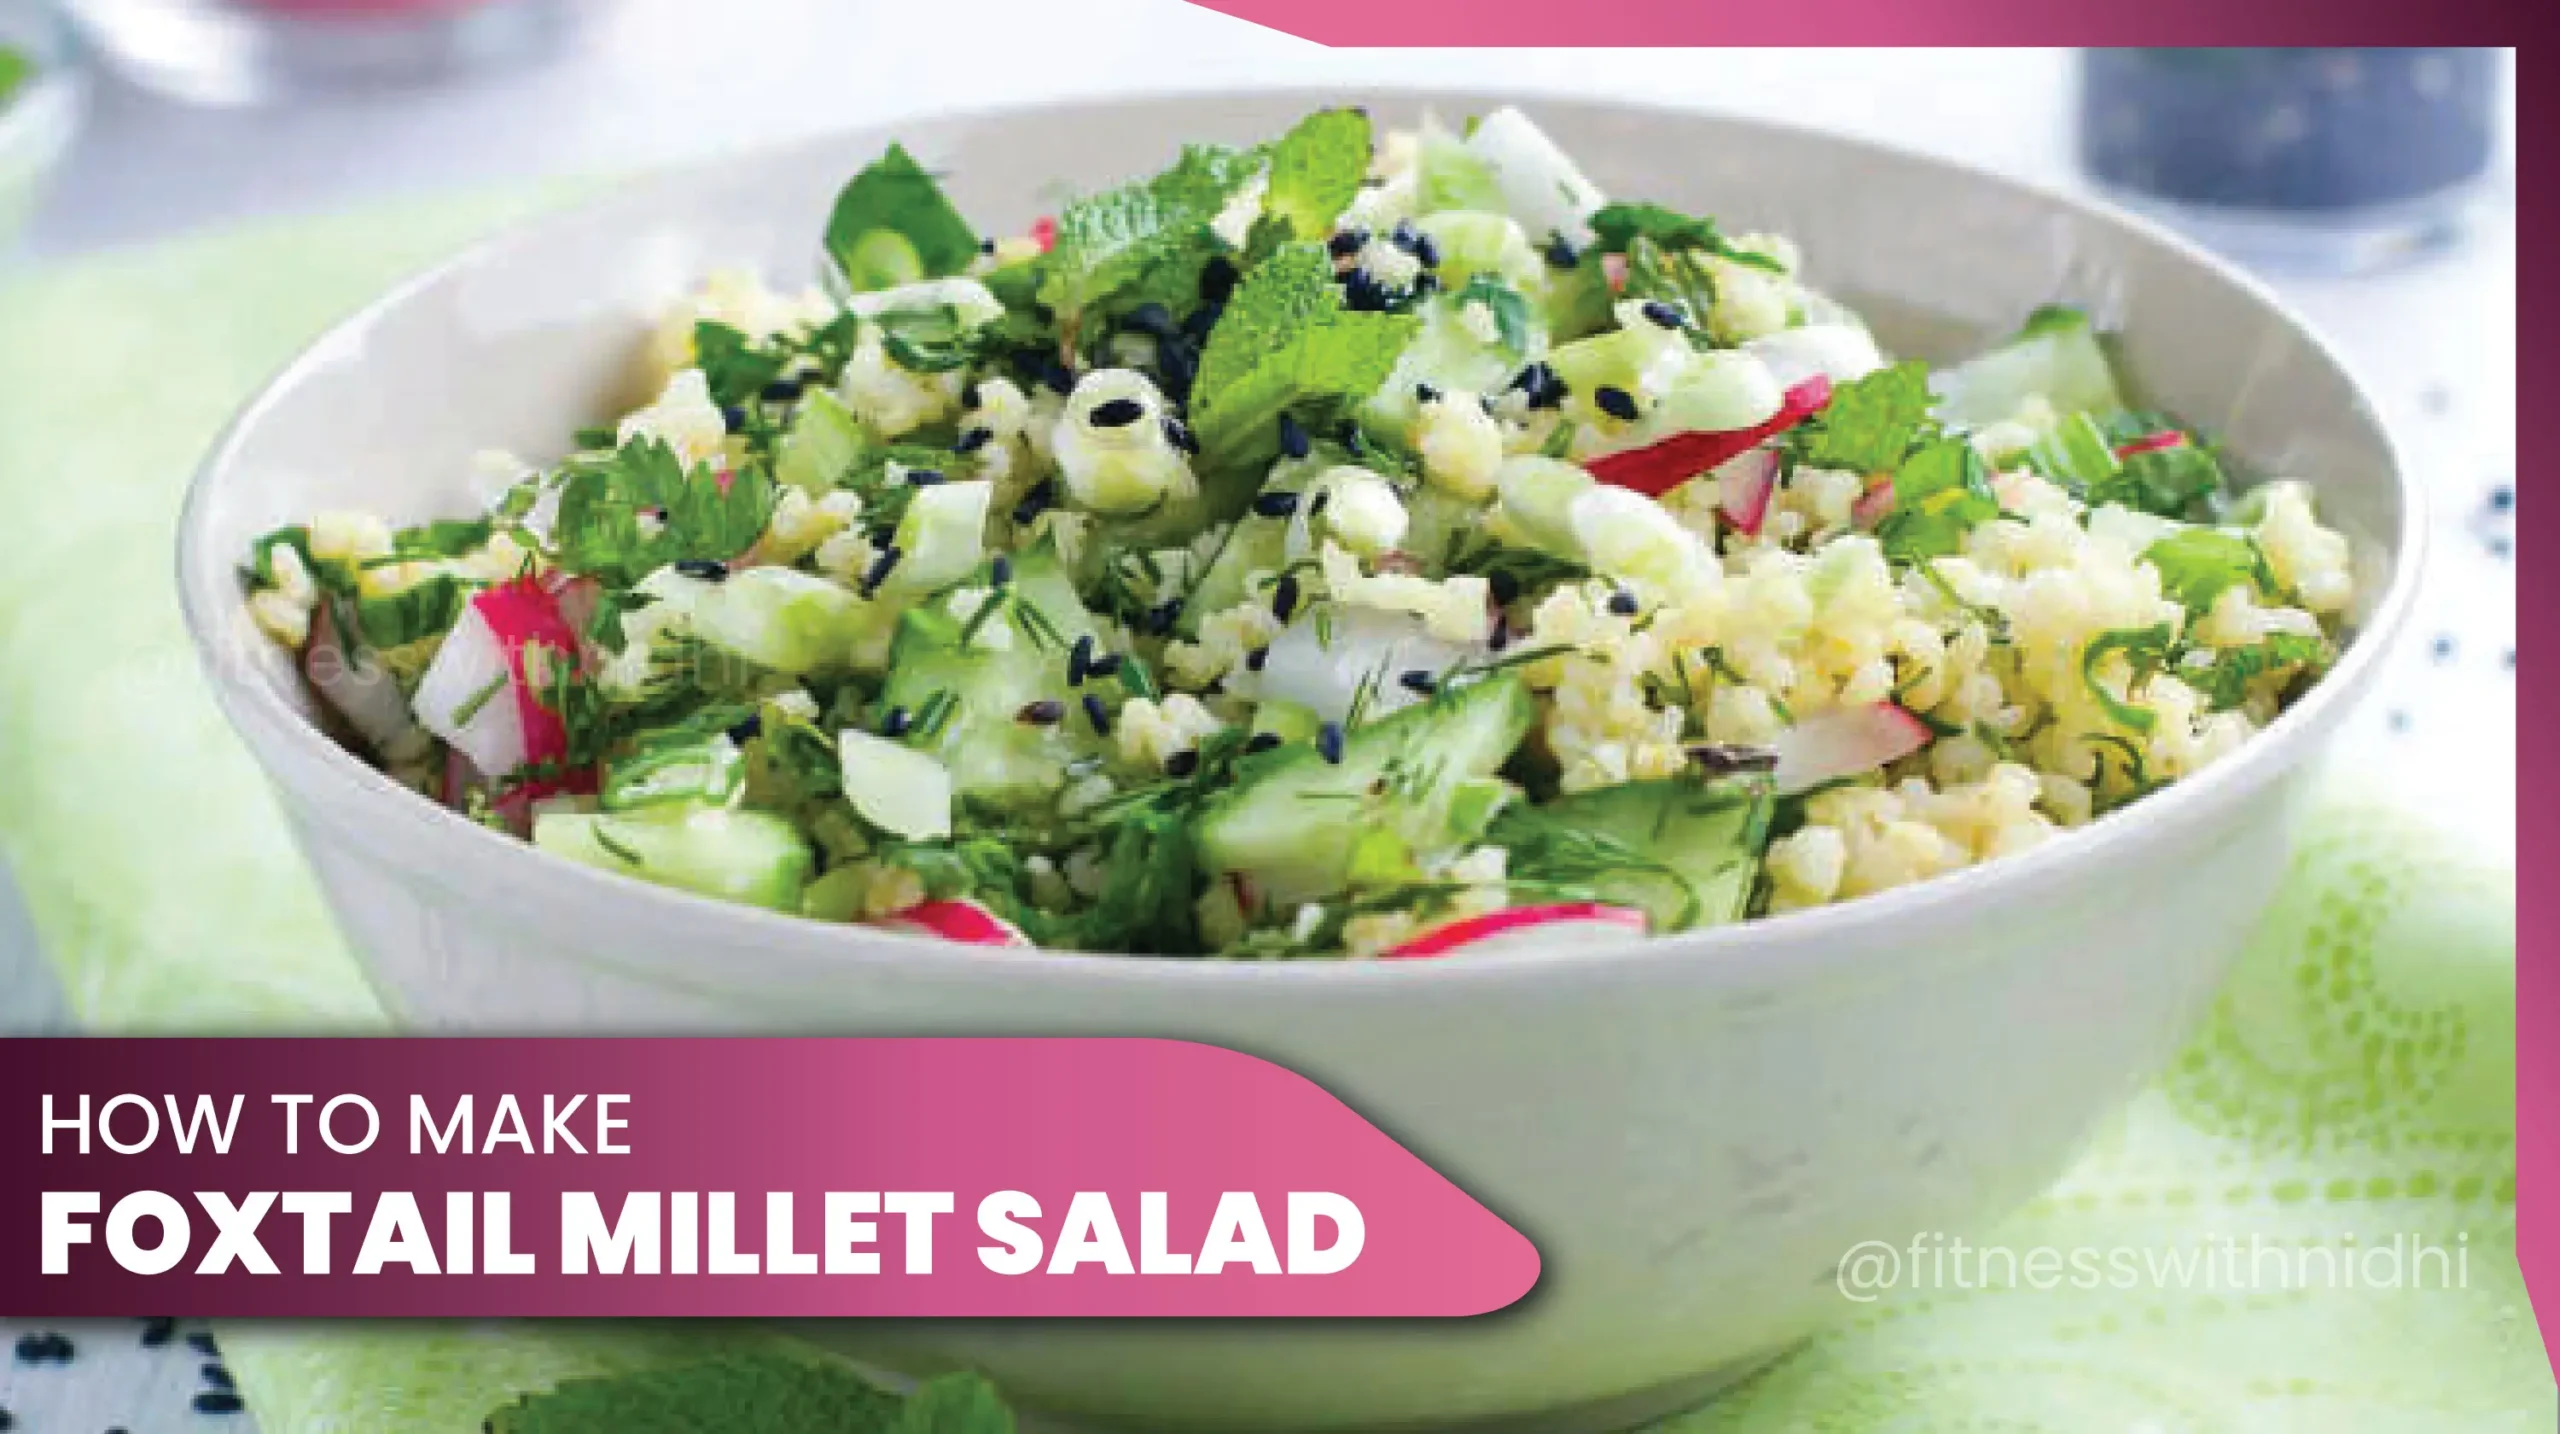 11how to make foxtail millet salad recipe